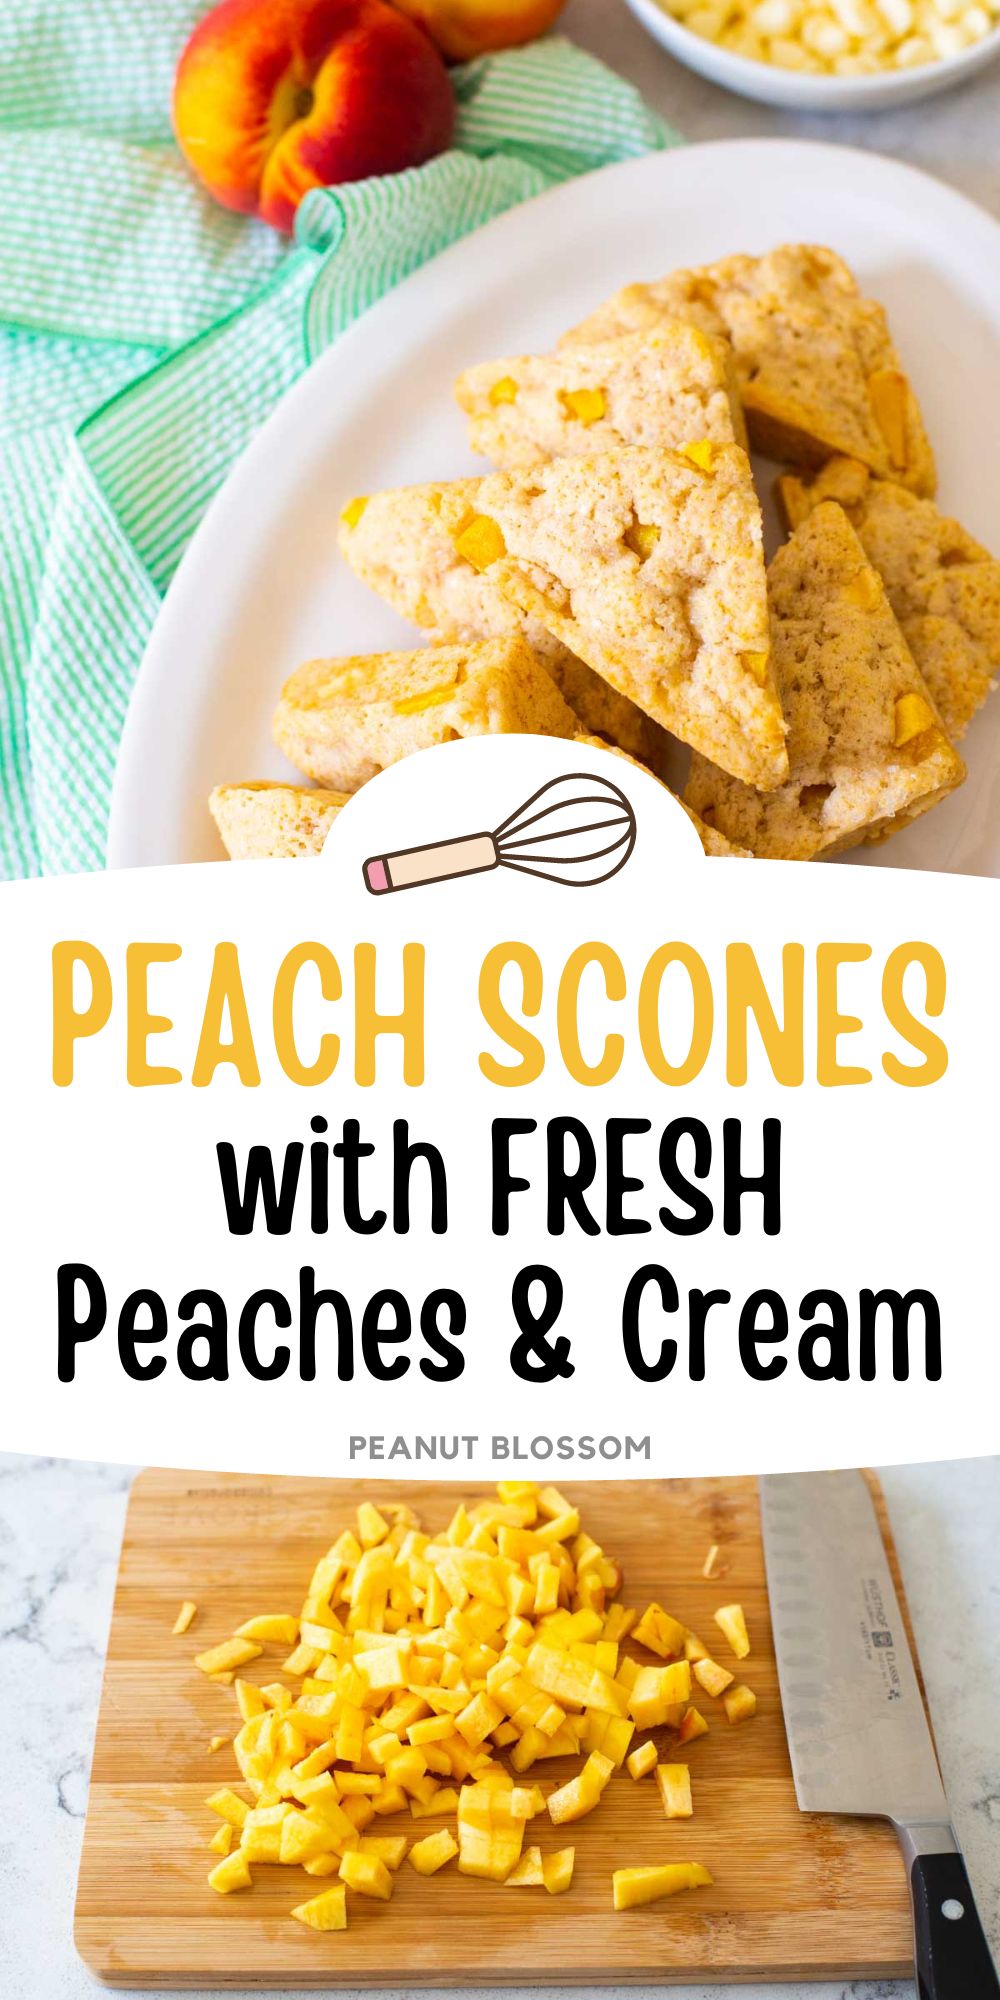 Photo collage shows the baked peach scones next to a fresh peach that has been chopped.